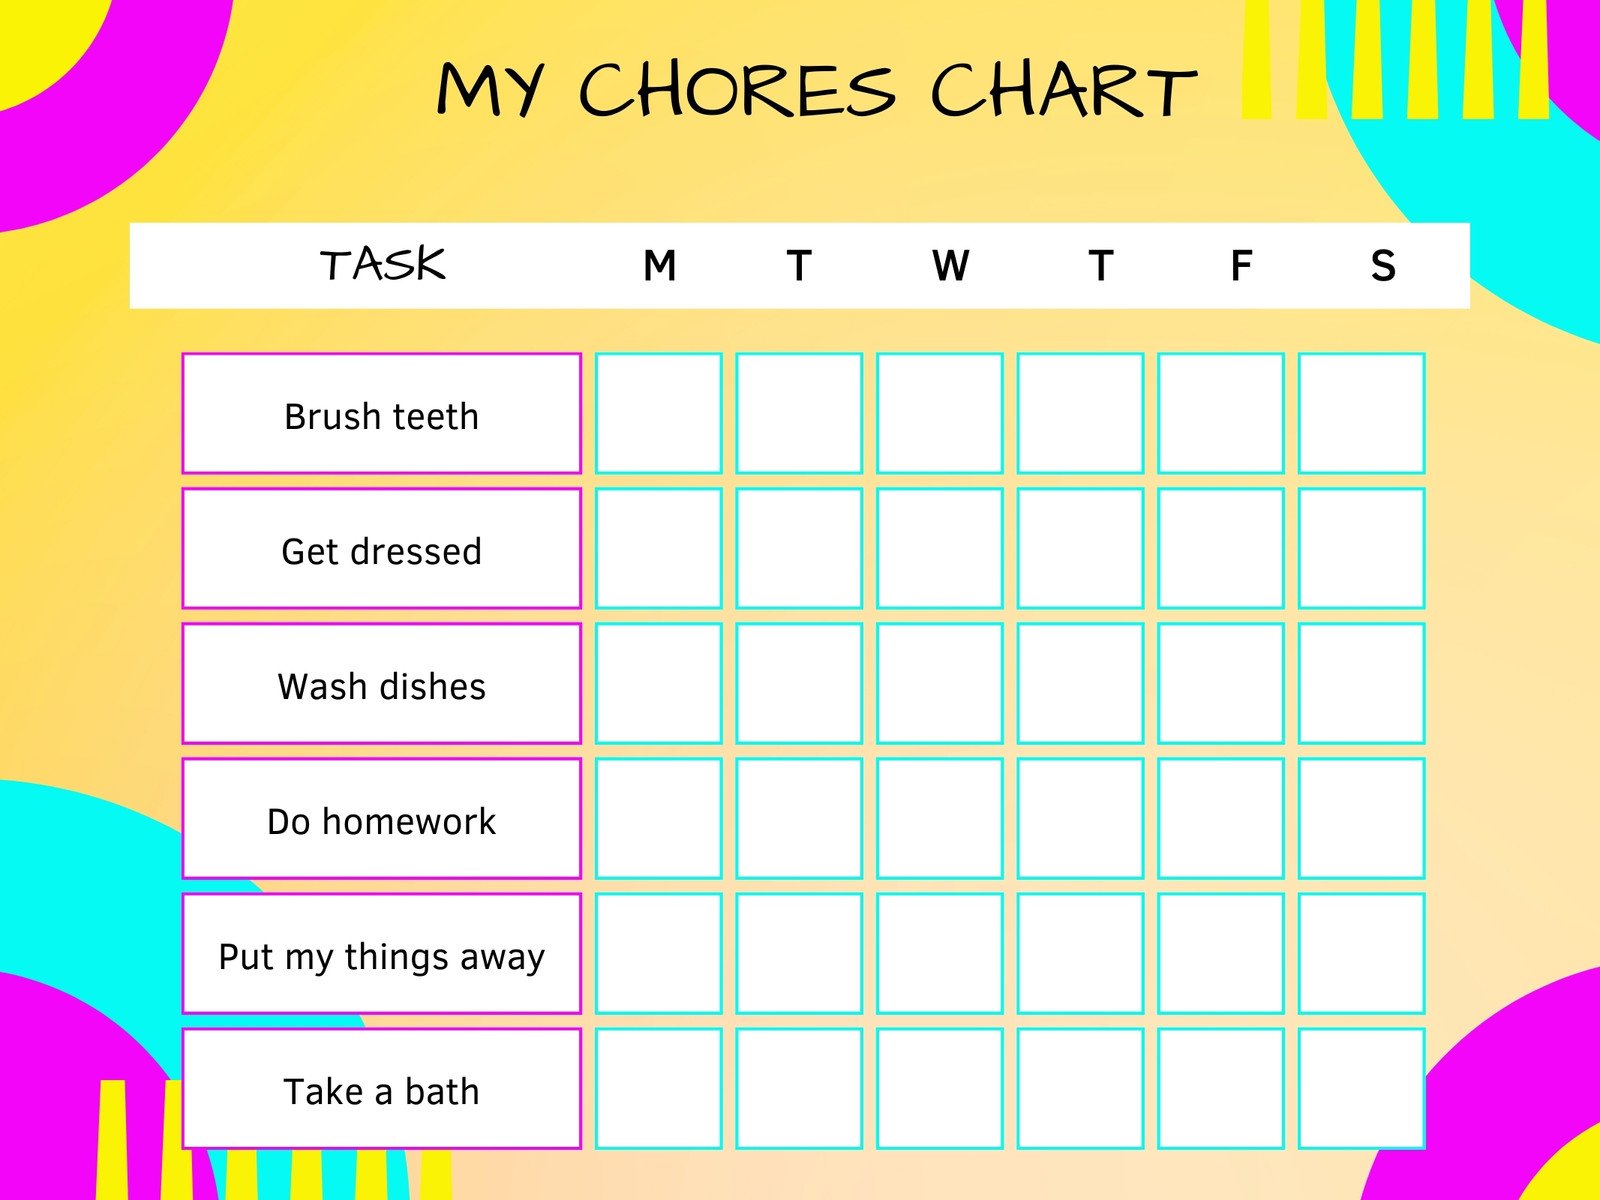 23 FREE Chore Chart Templates for Kids ᐅ TemplateLab